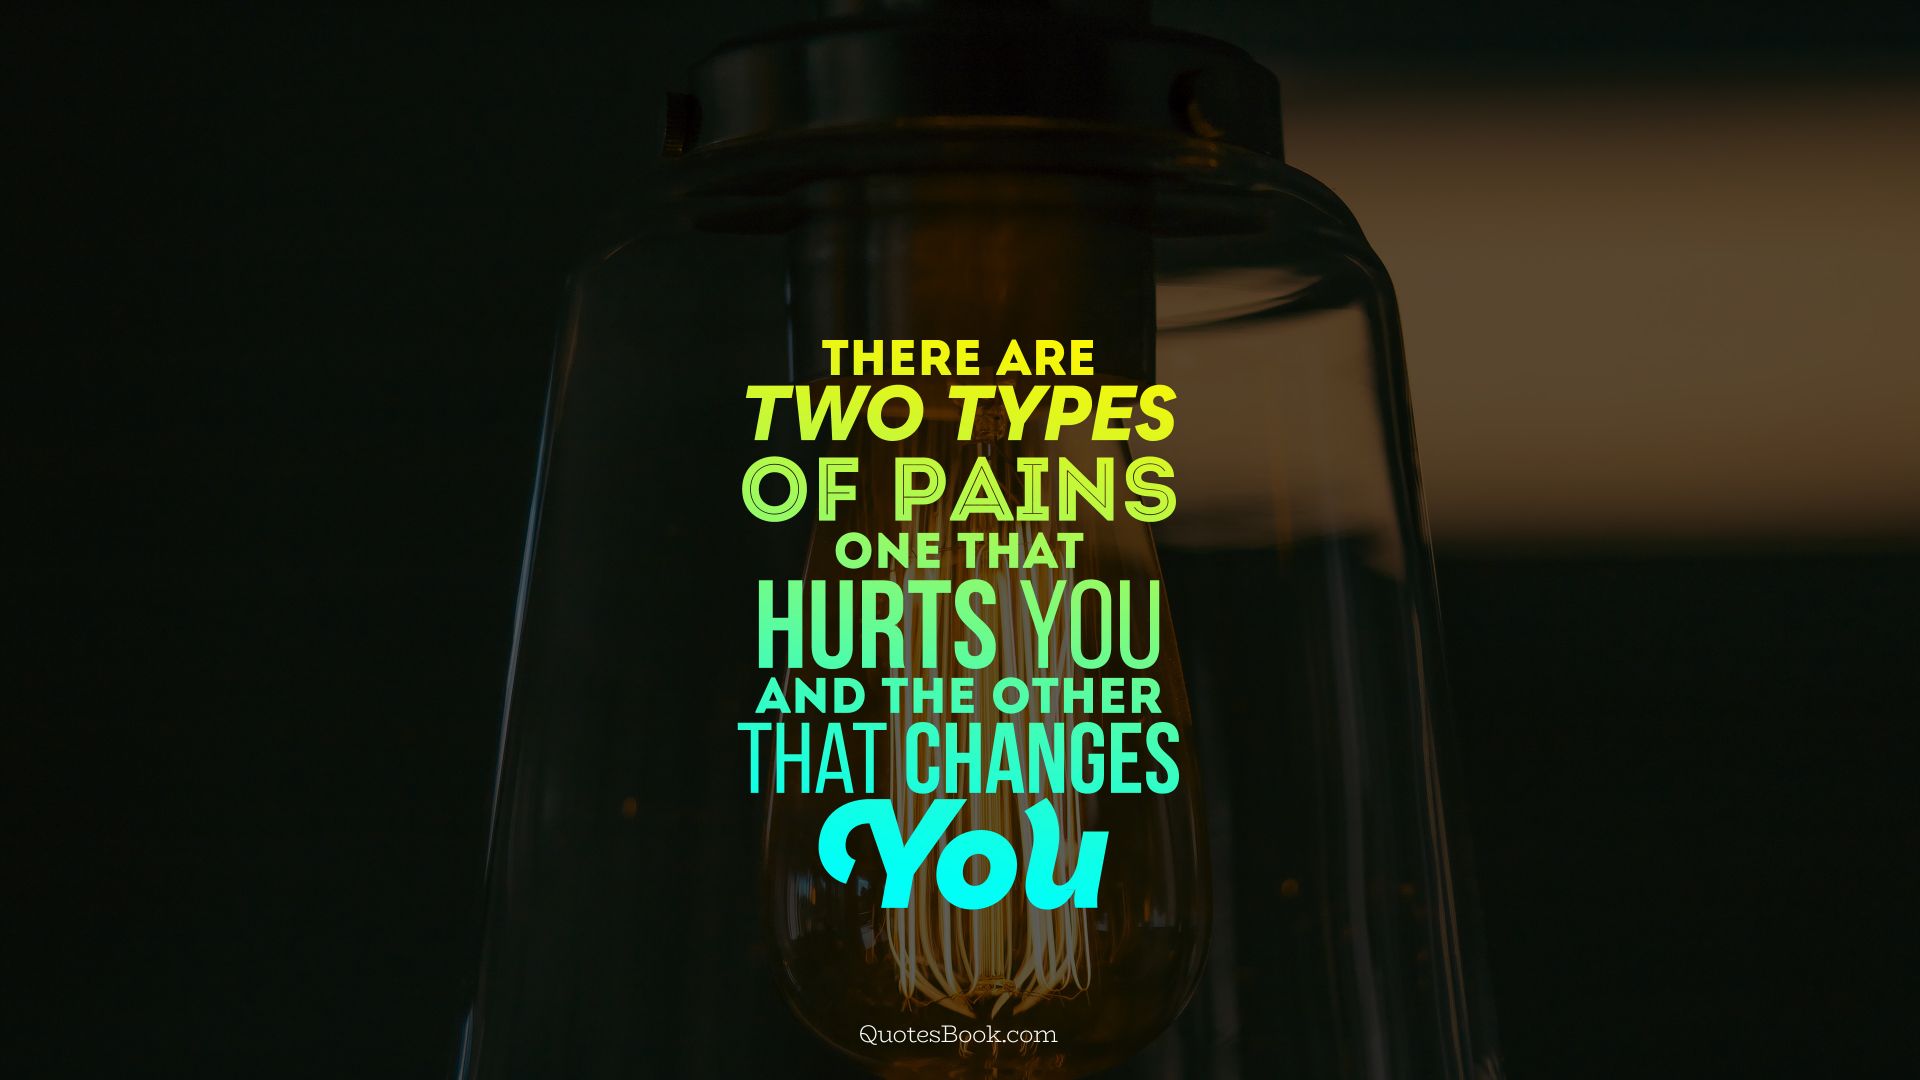 There are two types of pains one that hurts you and the other that changes you